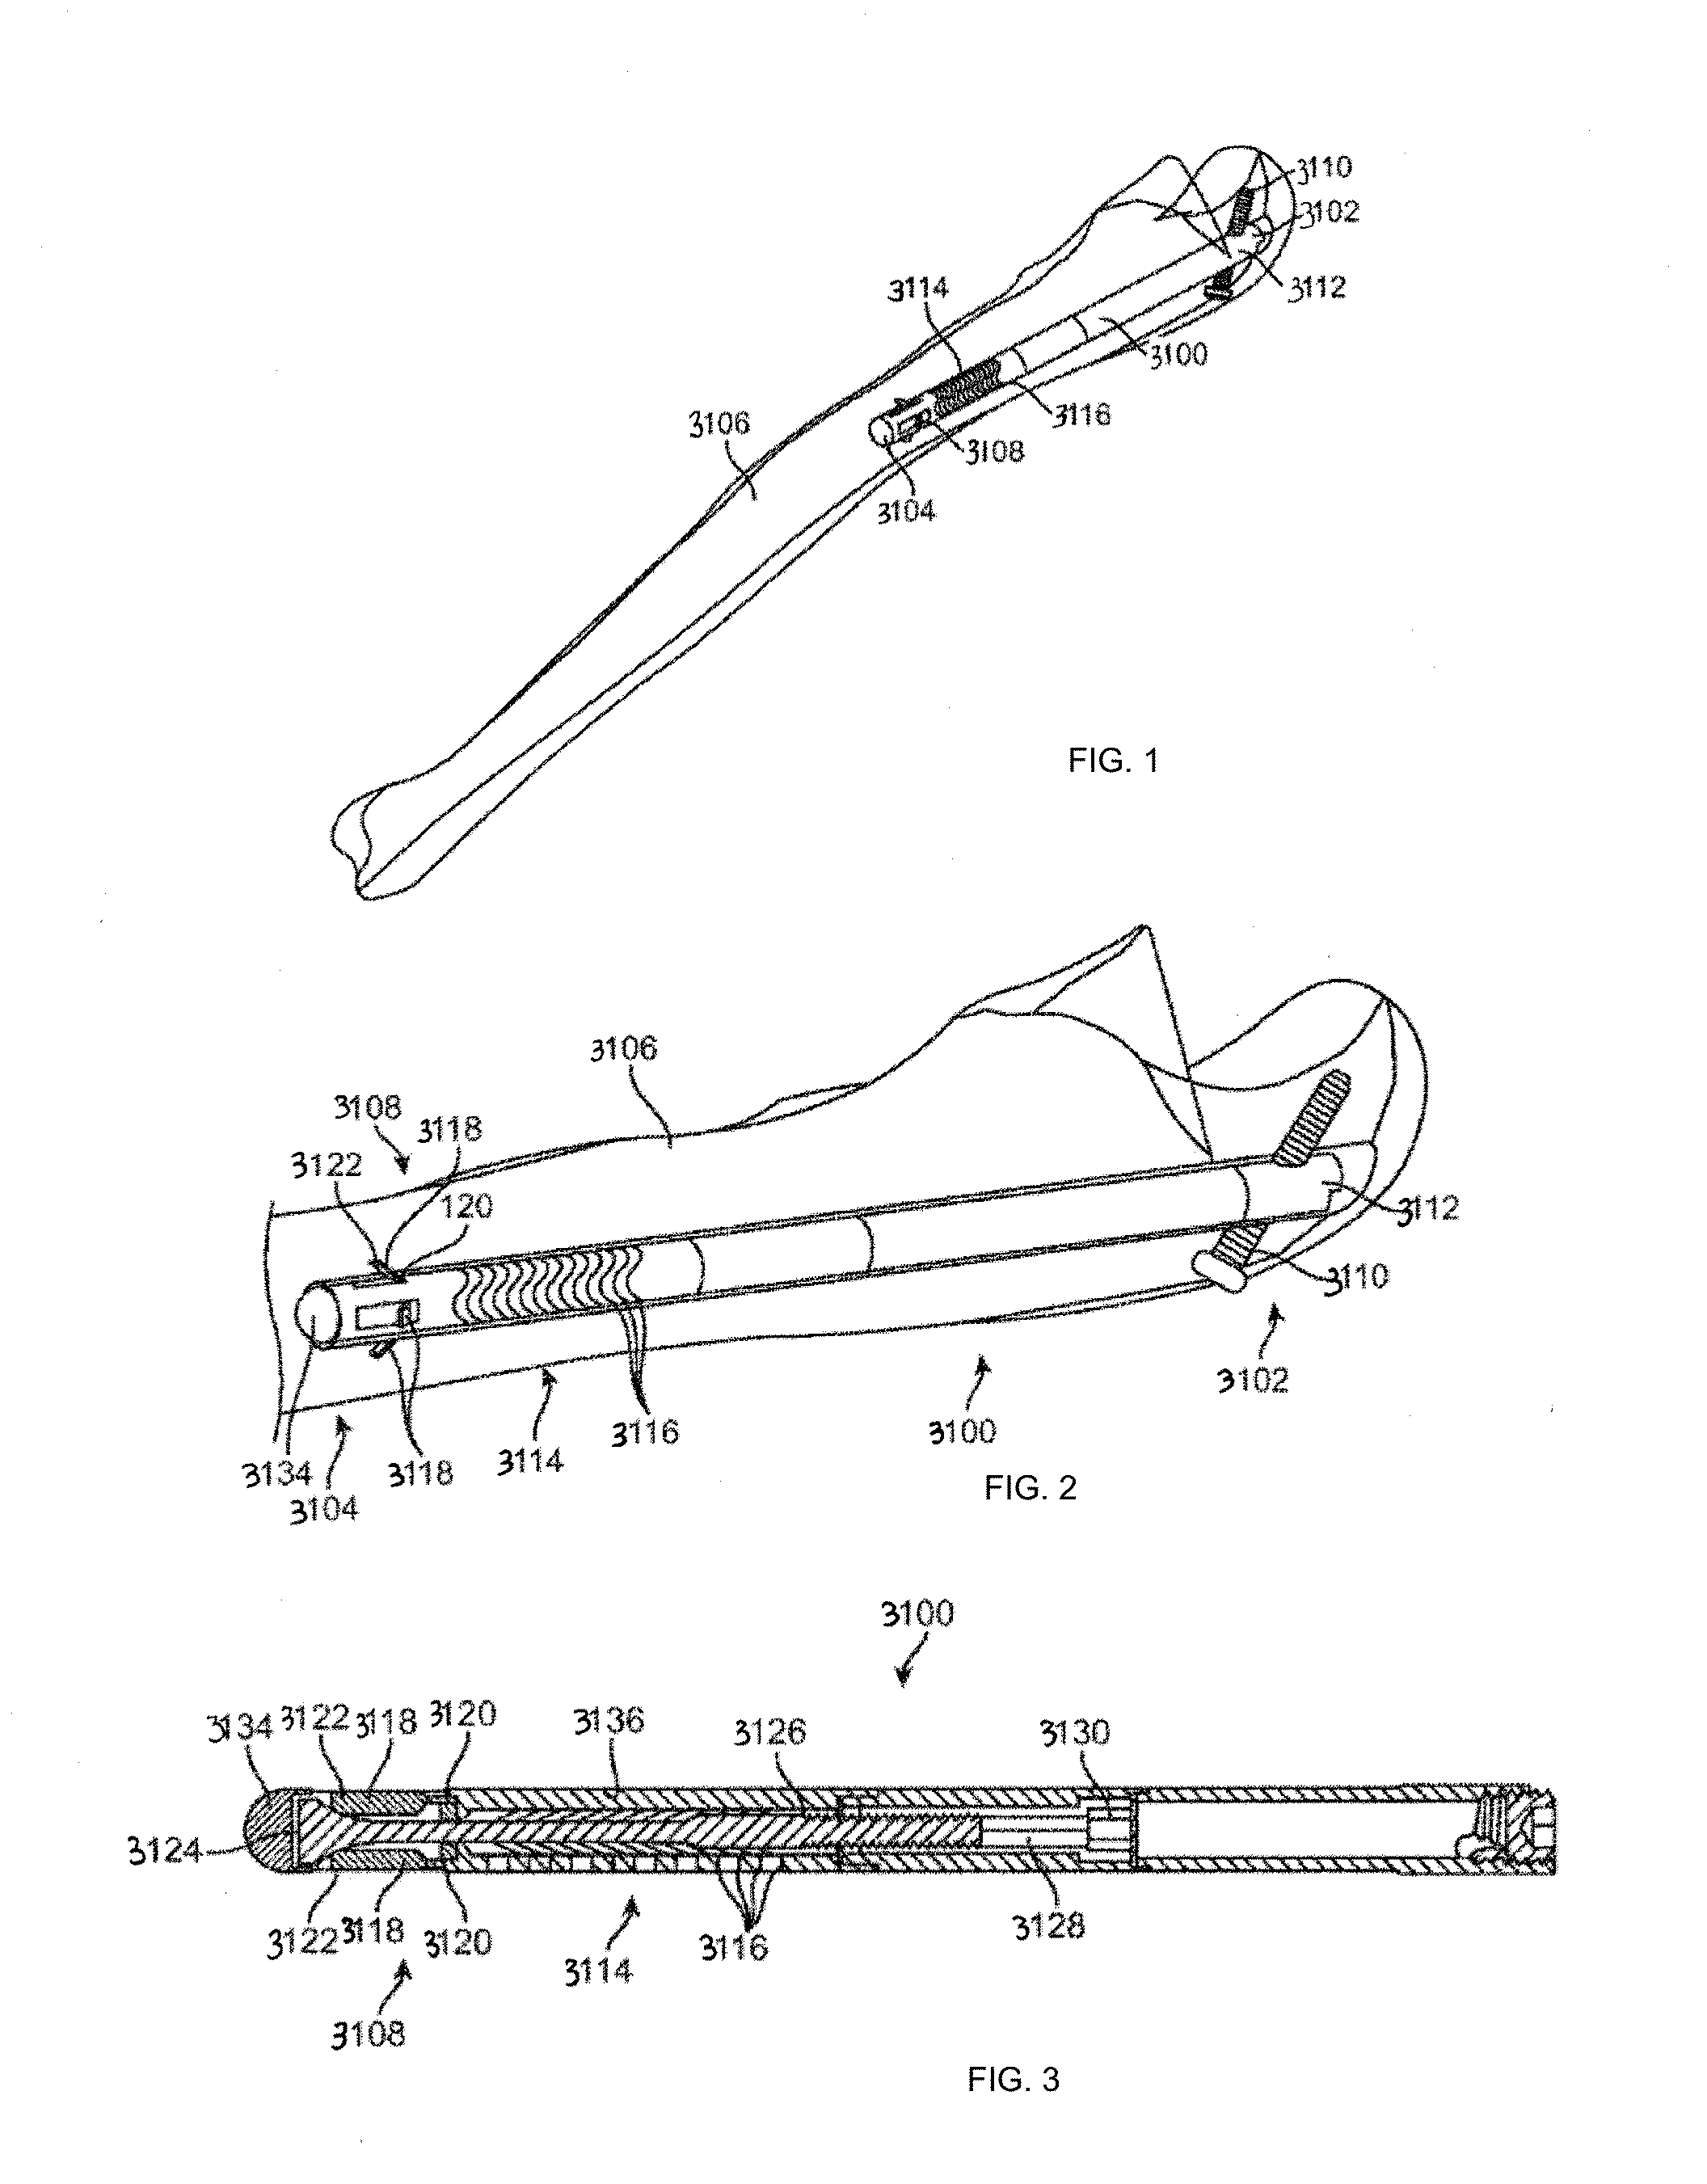 Intramedullary fracture fixation devices and methods